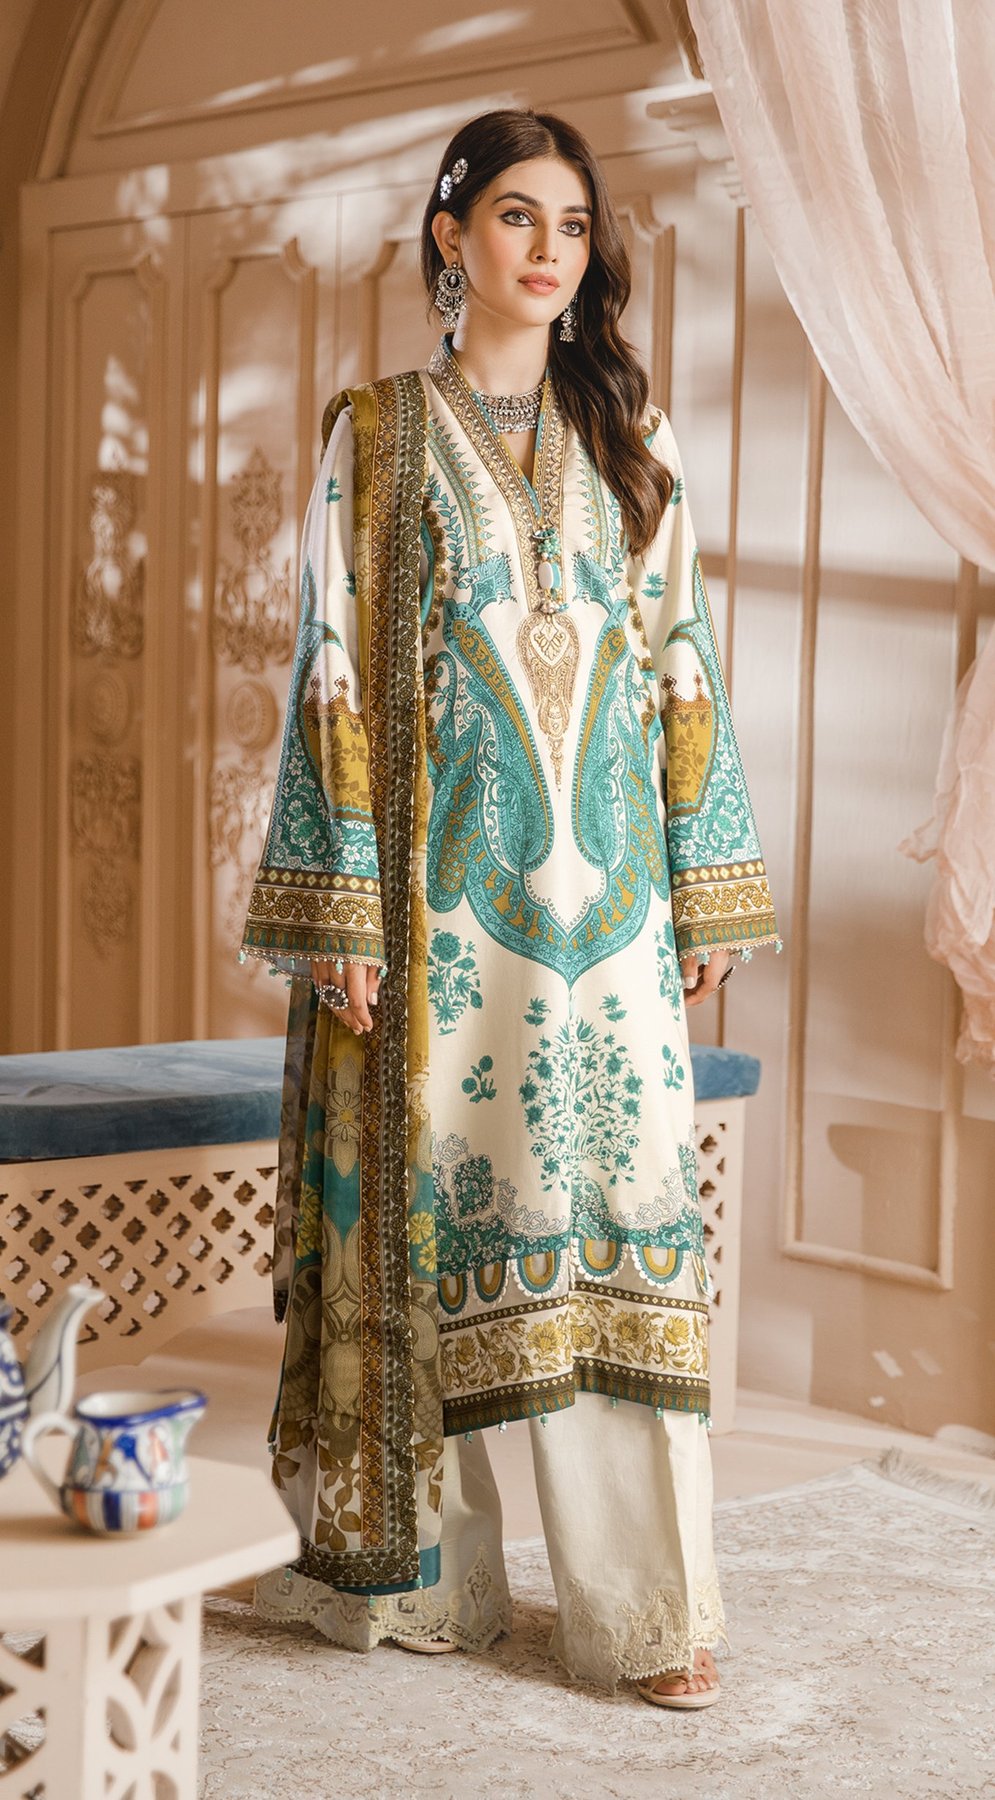 Nureh | Anaya by Kiran Chaudhry | Noor Bano | Unstitched Embroidered Cambric Collection'21